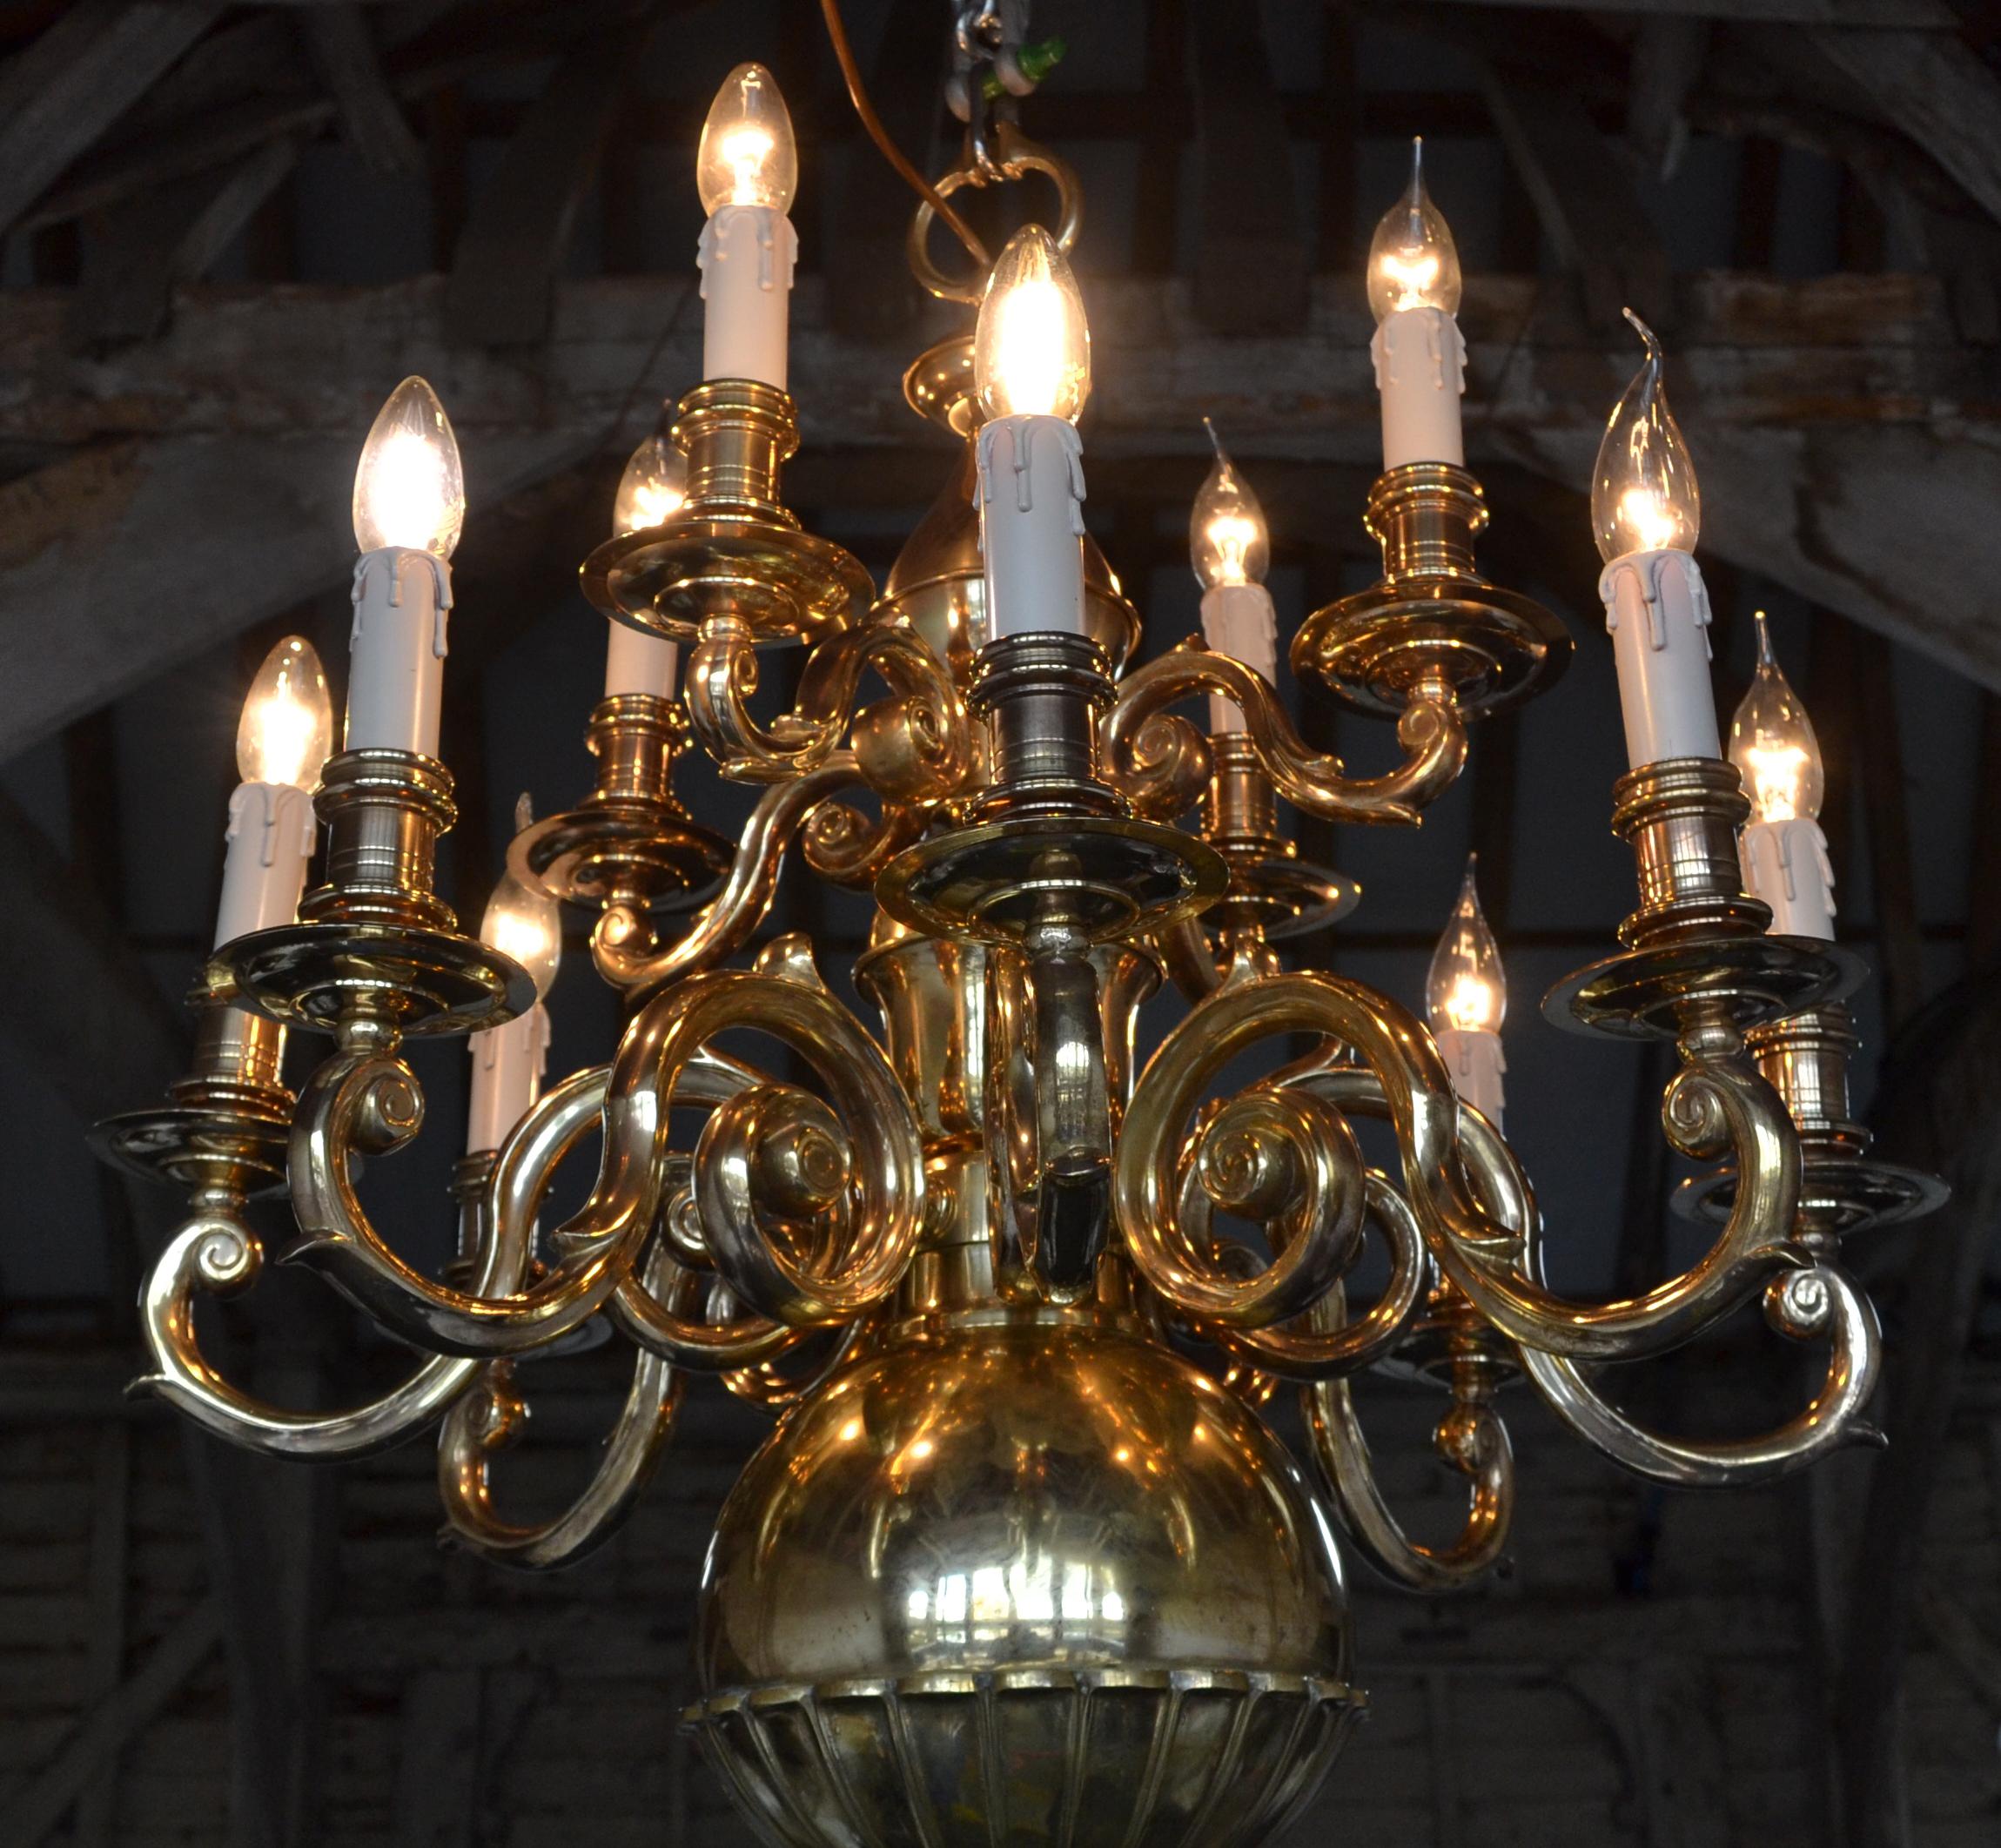 A very rare late Victorian Flemish style solid brass 12 light chandelier. This fixture is of exceptional quality, it has highly decorative scrolled arms cascading on to a unique bottom globe. Half the sphere is decorated with beautiful scalloped